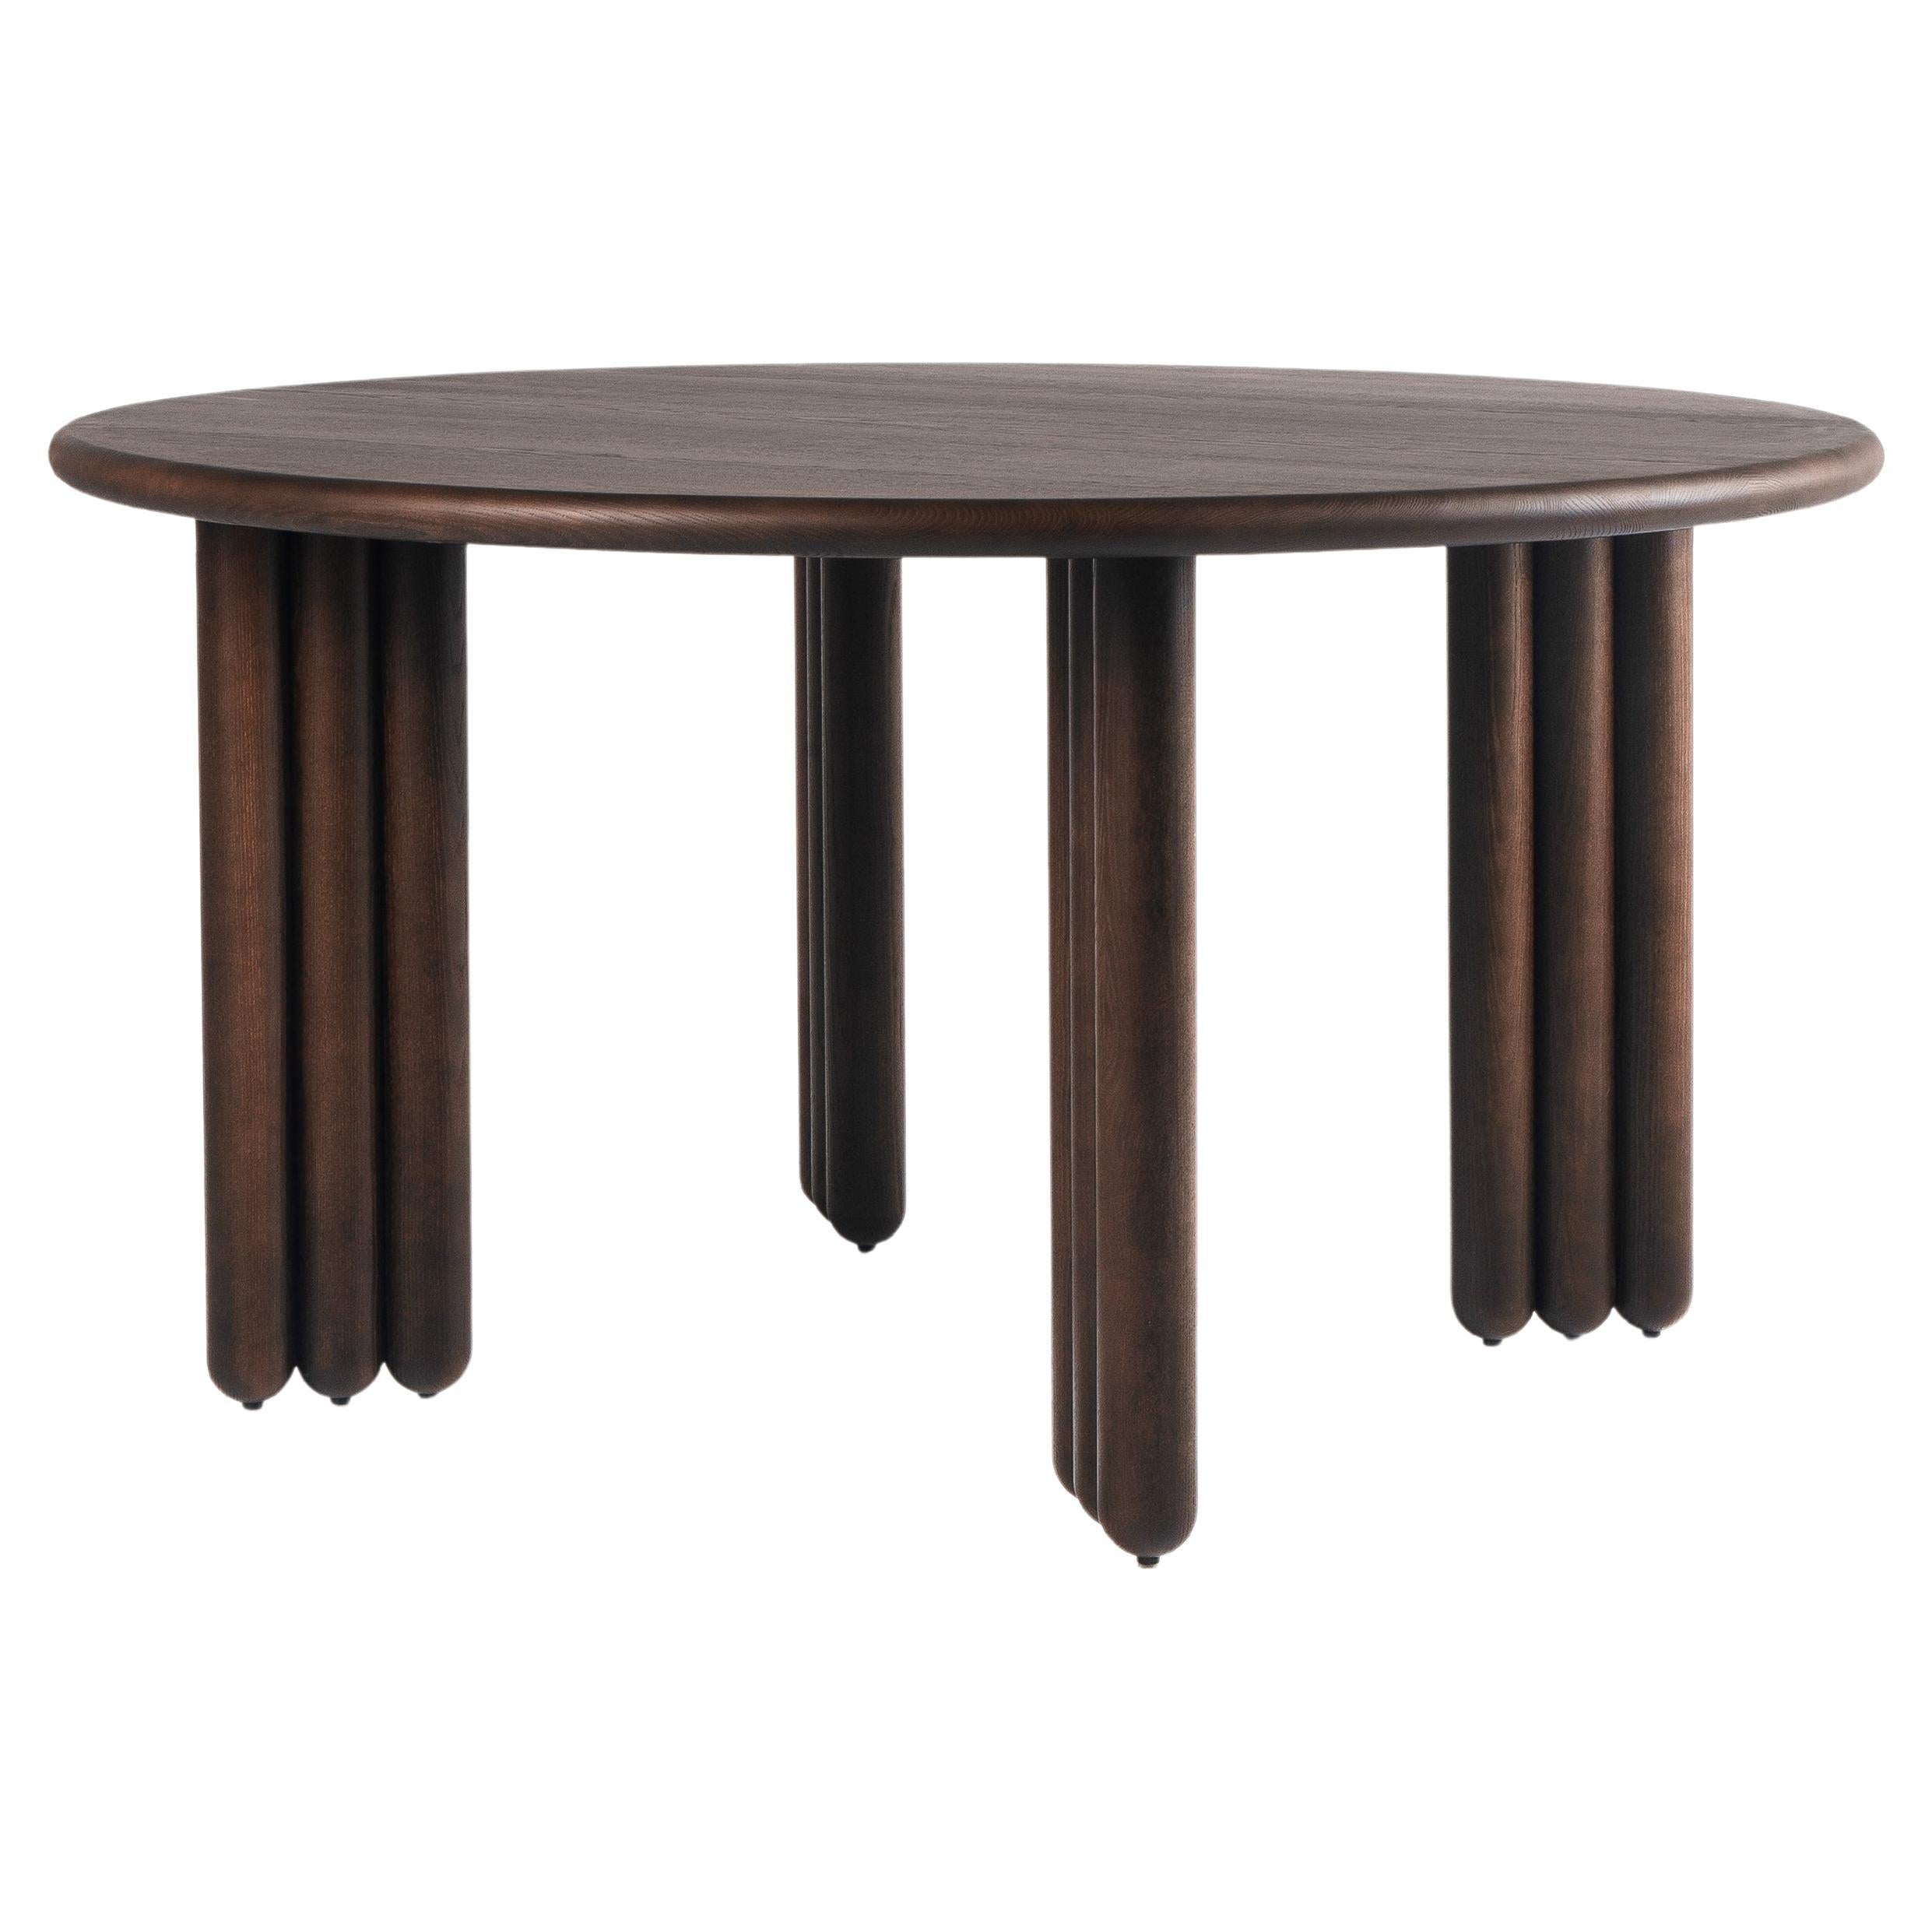 Contemporary Dining Round Table 'Flock' by Noom, 160 cm